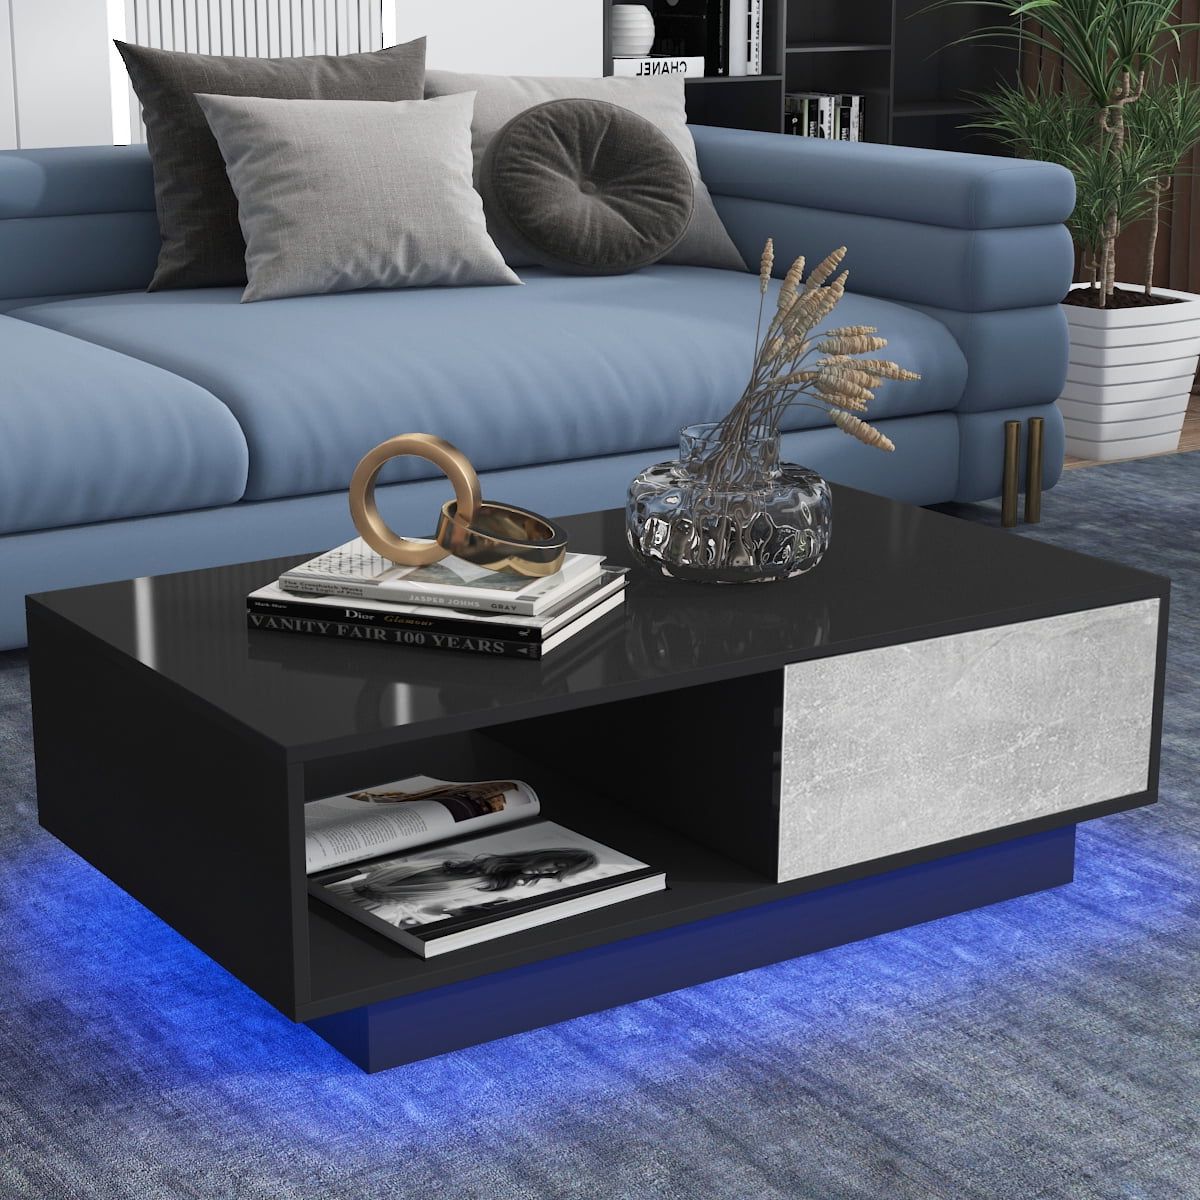 Hommpa High Gloss Black Coffee Table With 4 Drawers And Open Shelf Led Sofa  Side End Tea Table Modern Living Room Furniture With Storage Space –  Walmart For Well Liked High Gloss Black Coffee Tables (View 10 of 10)